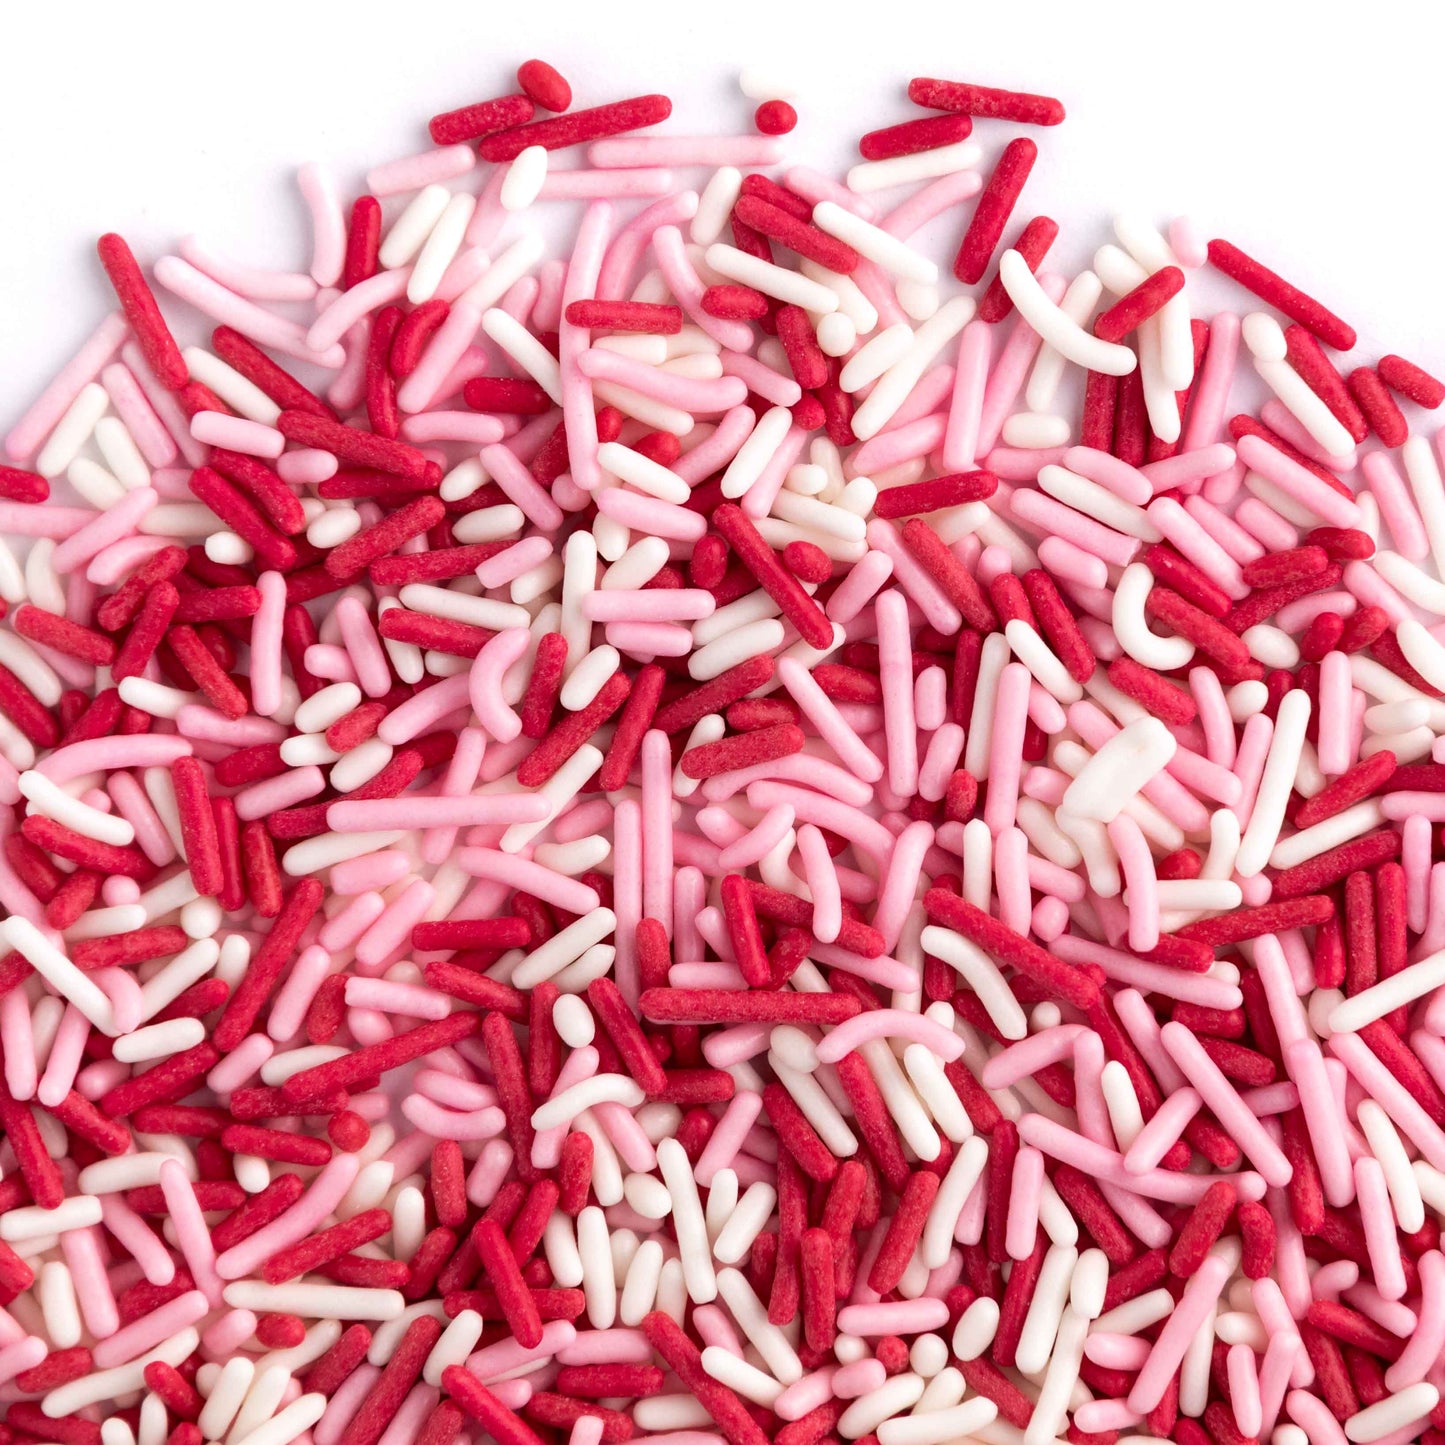 Natural Red, White & Pink Jimmies